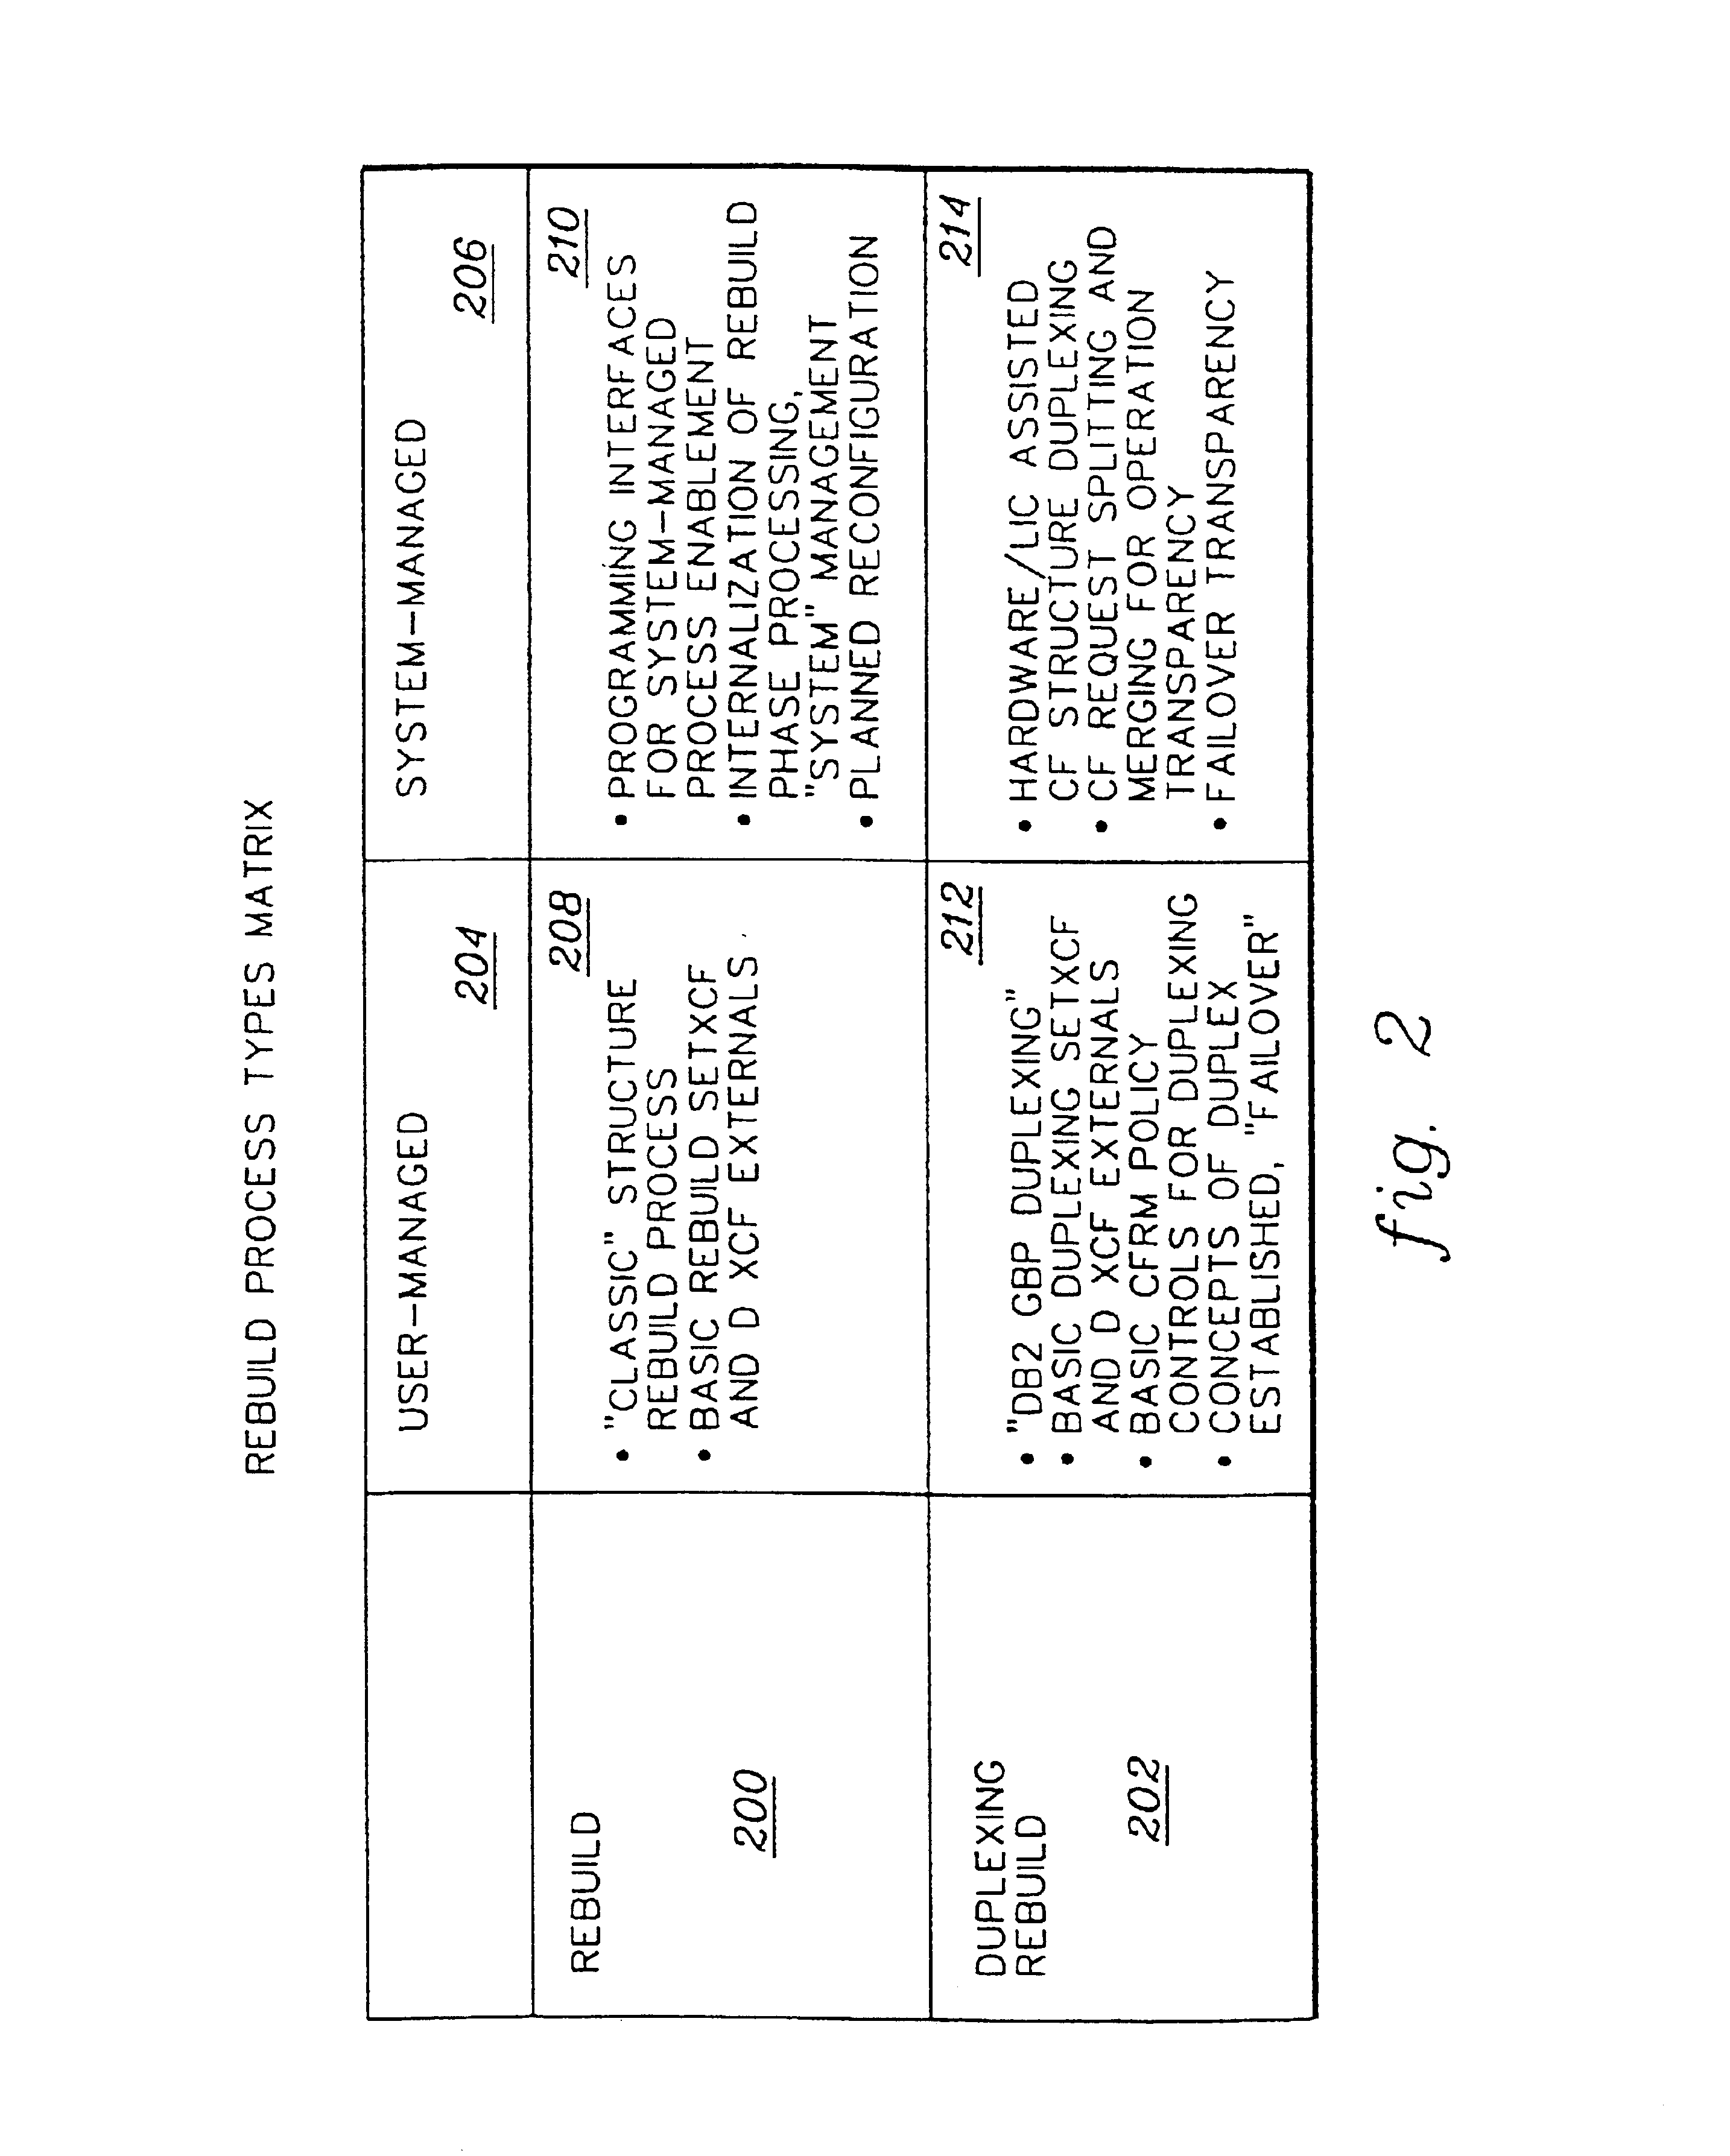 Managing connections to coupling facility structures